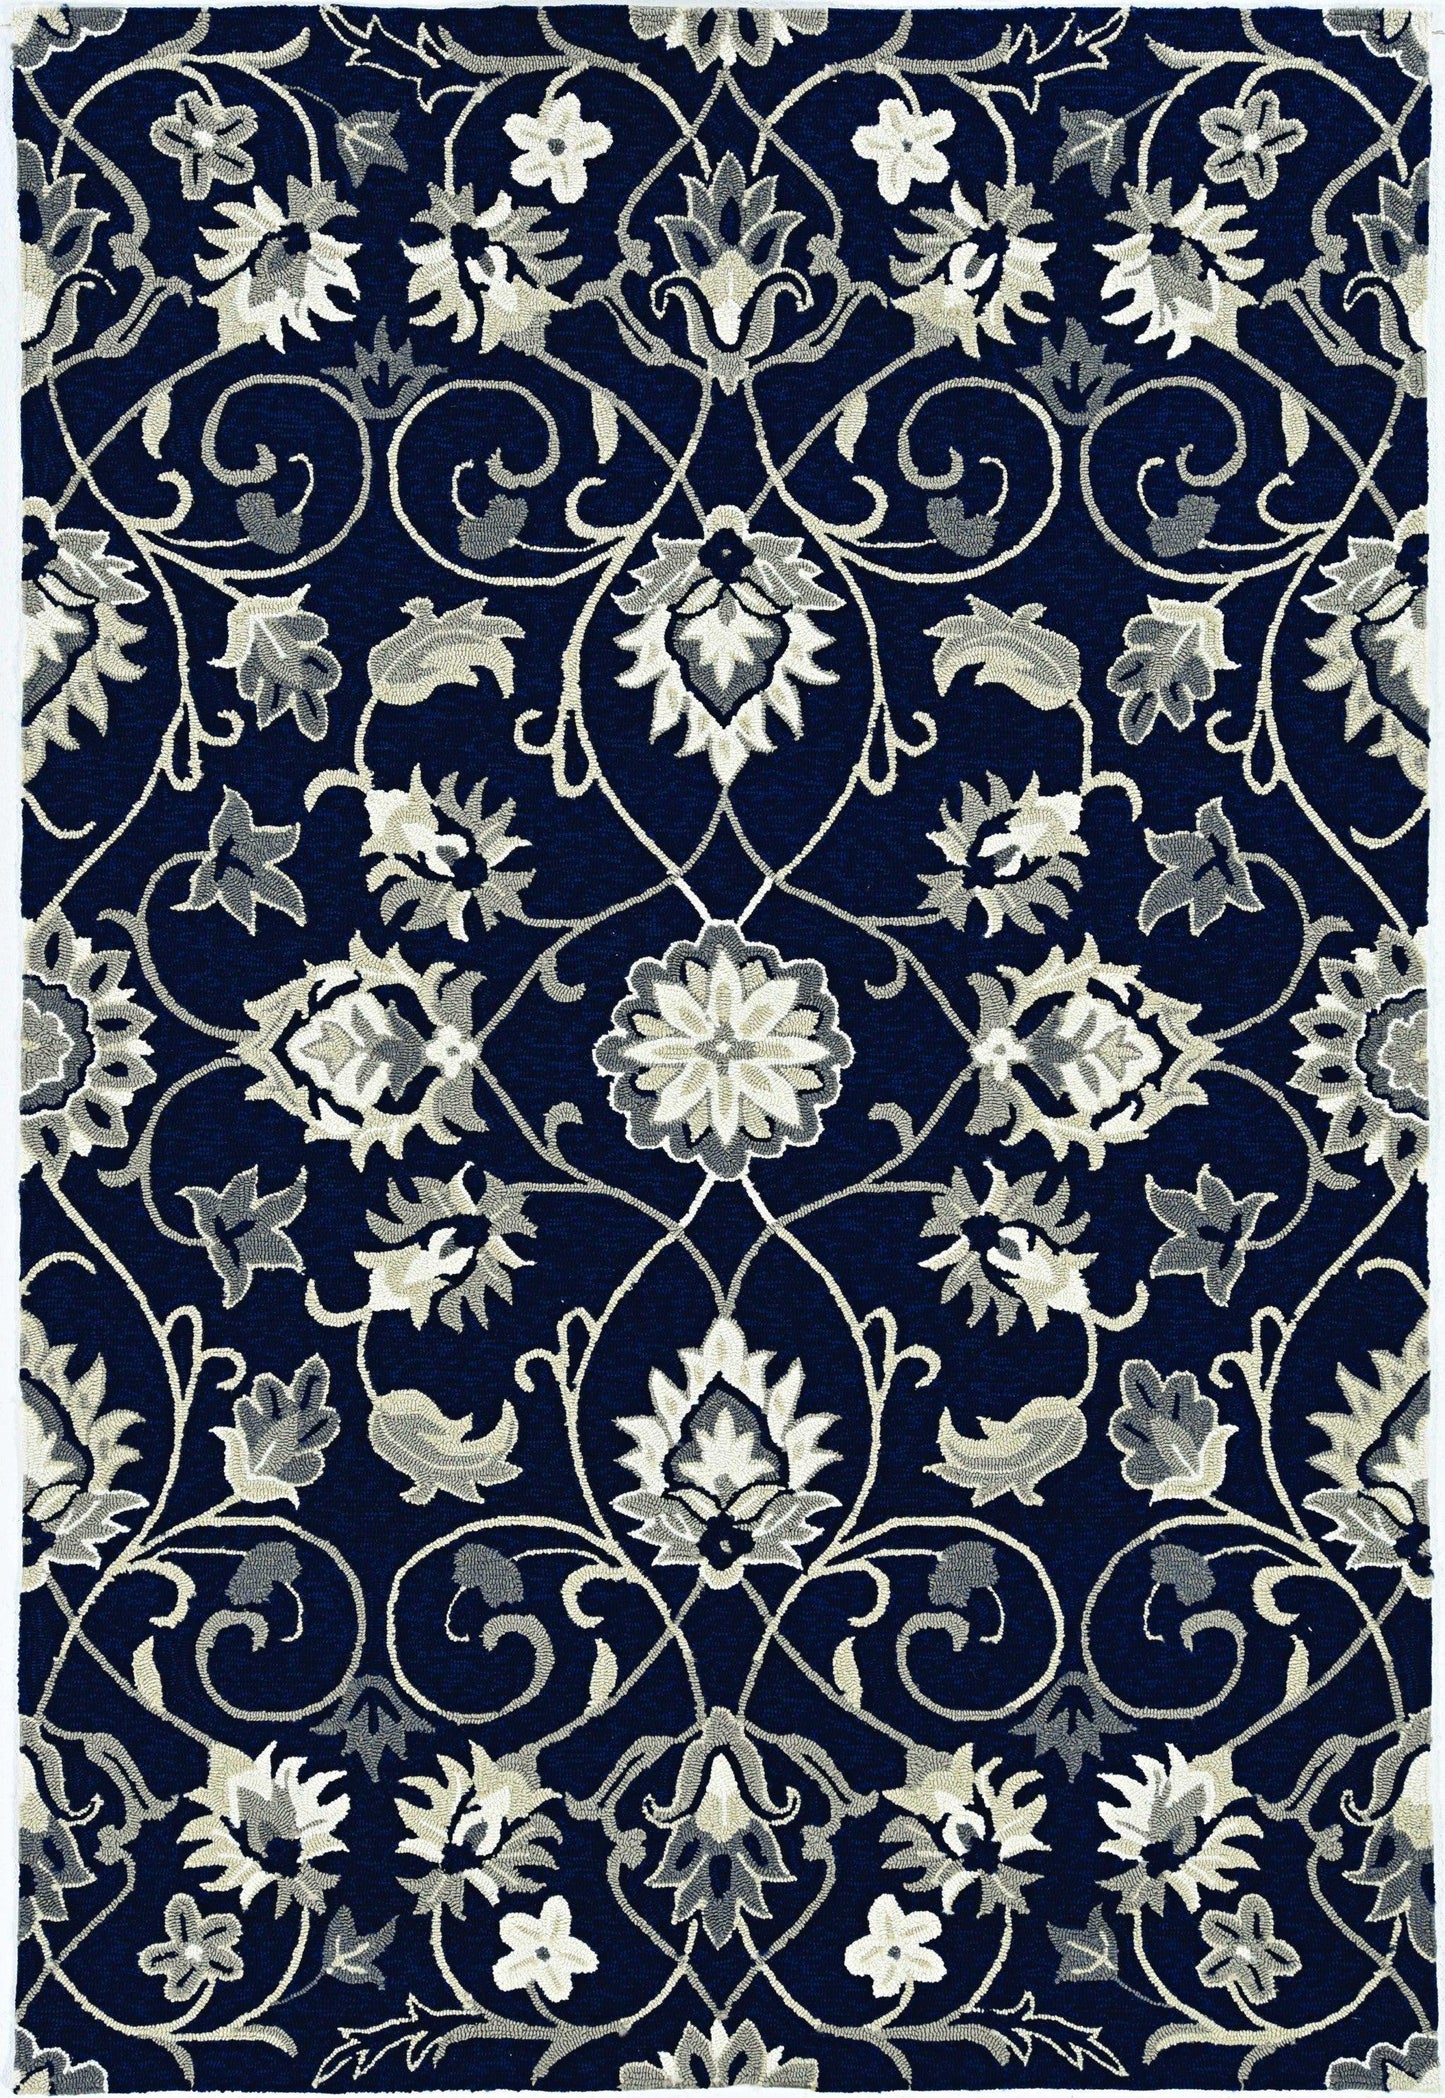 2'x3' Navy Blue Hand Hooked UV Treated Floral Vines Indoor Outdoor Accent Rug - AFS